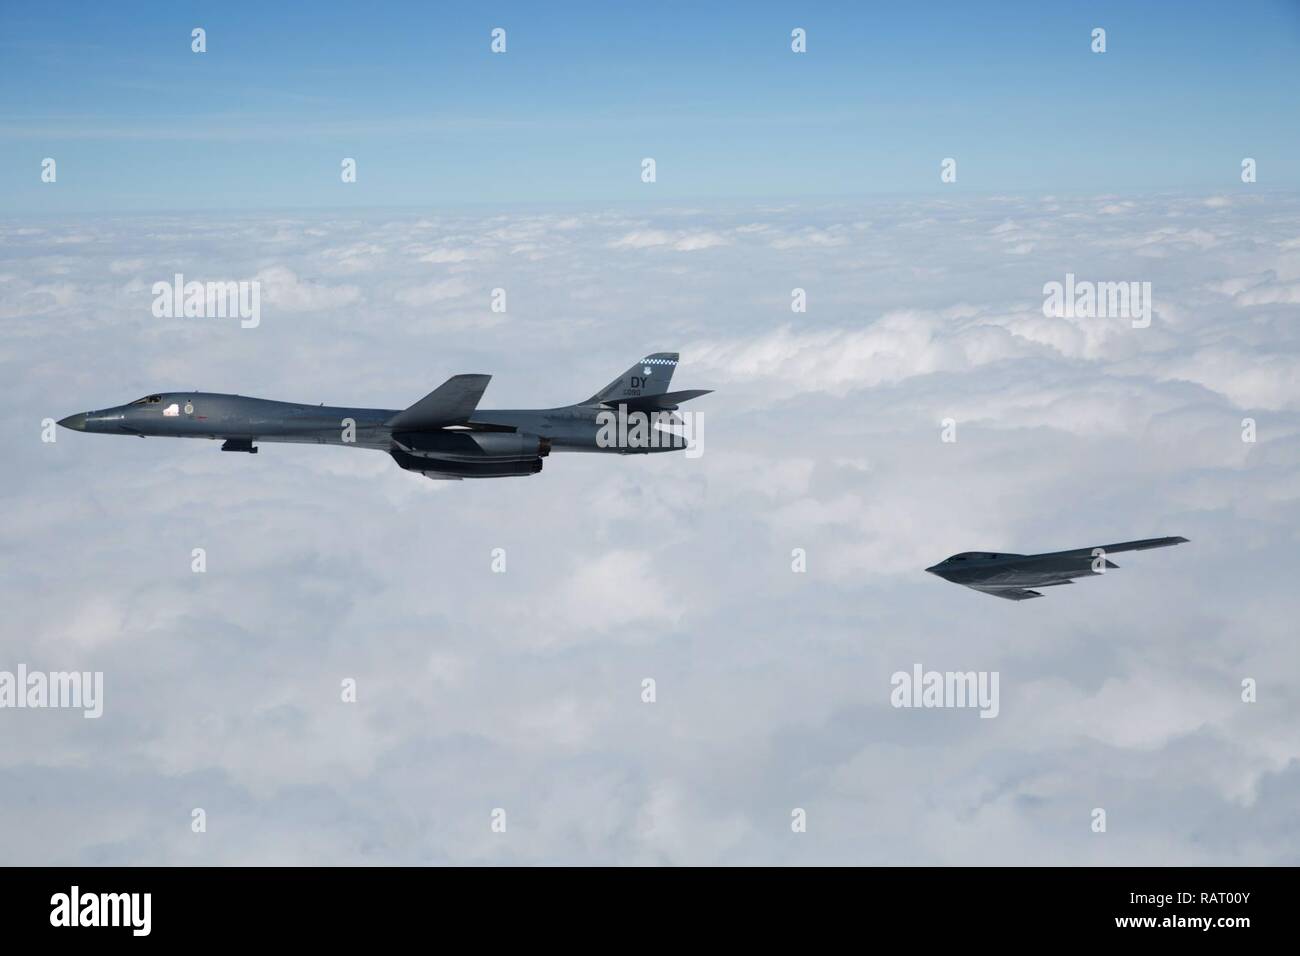 A B-1B Lancer and B-2 Spirit fly near Barksdale Air Force Base, La., Feb. 2, 2017. The two bombers, along with a B-52 Stratofortress, flew an in-trail formation over Barksdale AFB during a retreat ceremony held by the Eighth Air Force. Distinguished guests, leadership and ‘Mighty Eighth’ Airmen gathered to celebrate the Eighth Air Force’s 75th anniversary by partaking in various events throughout the week. Eighth Air Force dates back to VIII Bomber Command and World War II, which came into being Feb. 1, 1942. Stock Photo